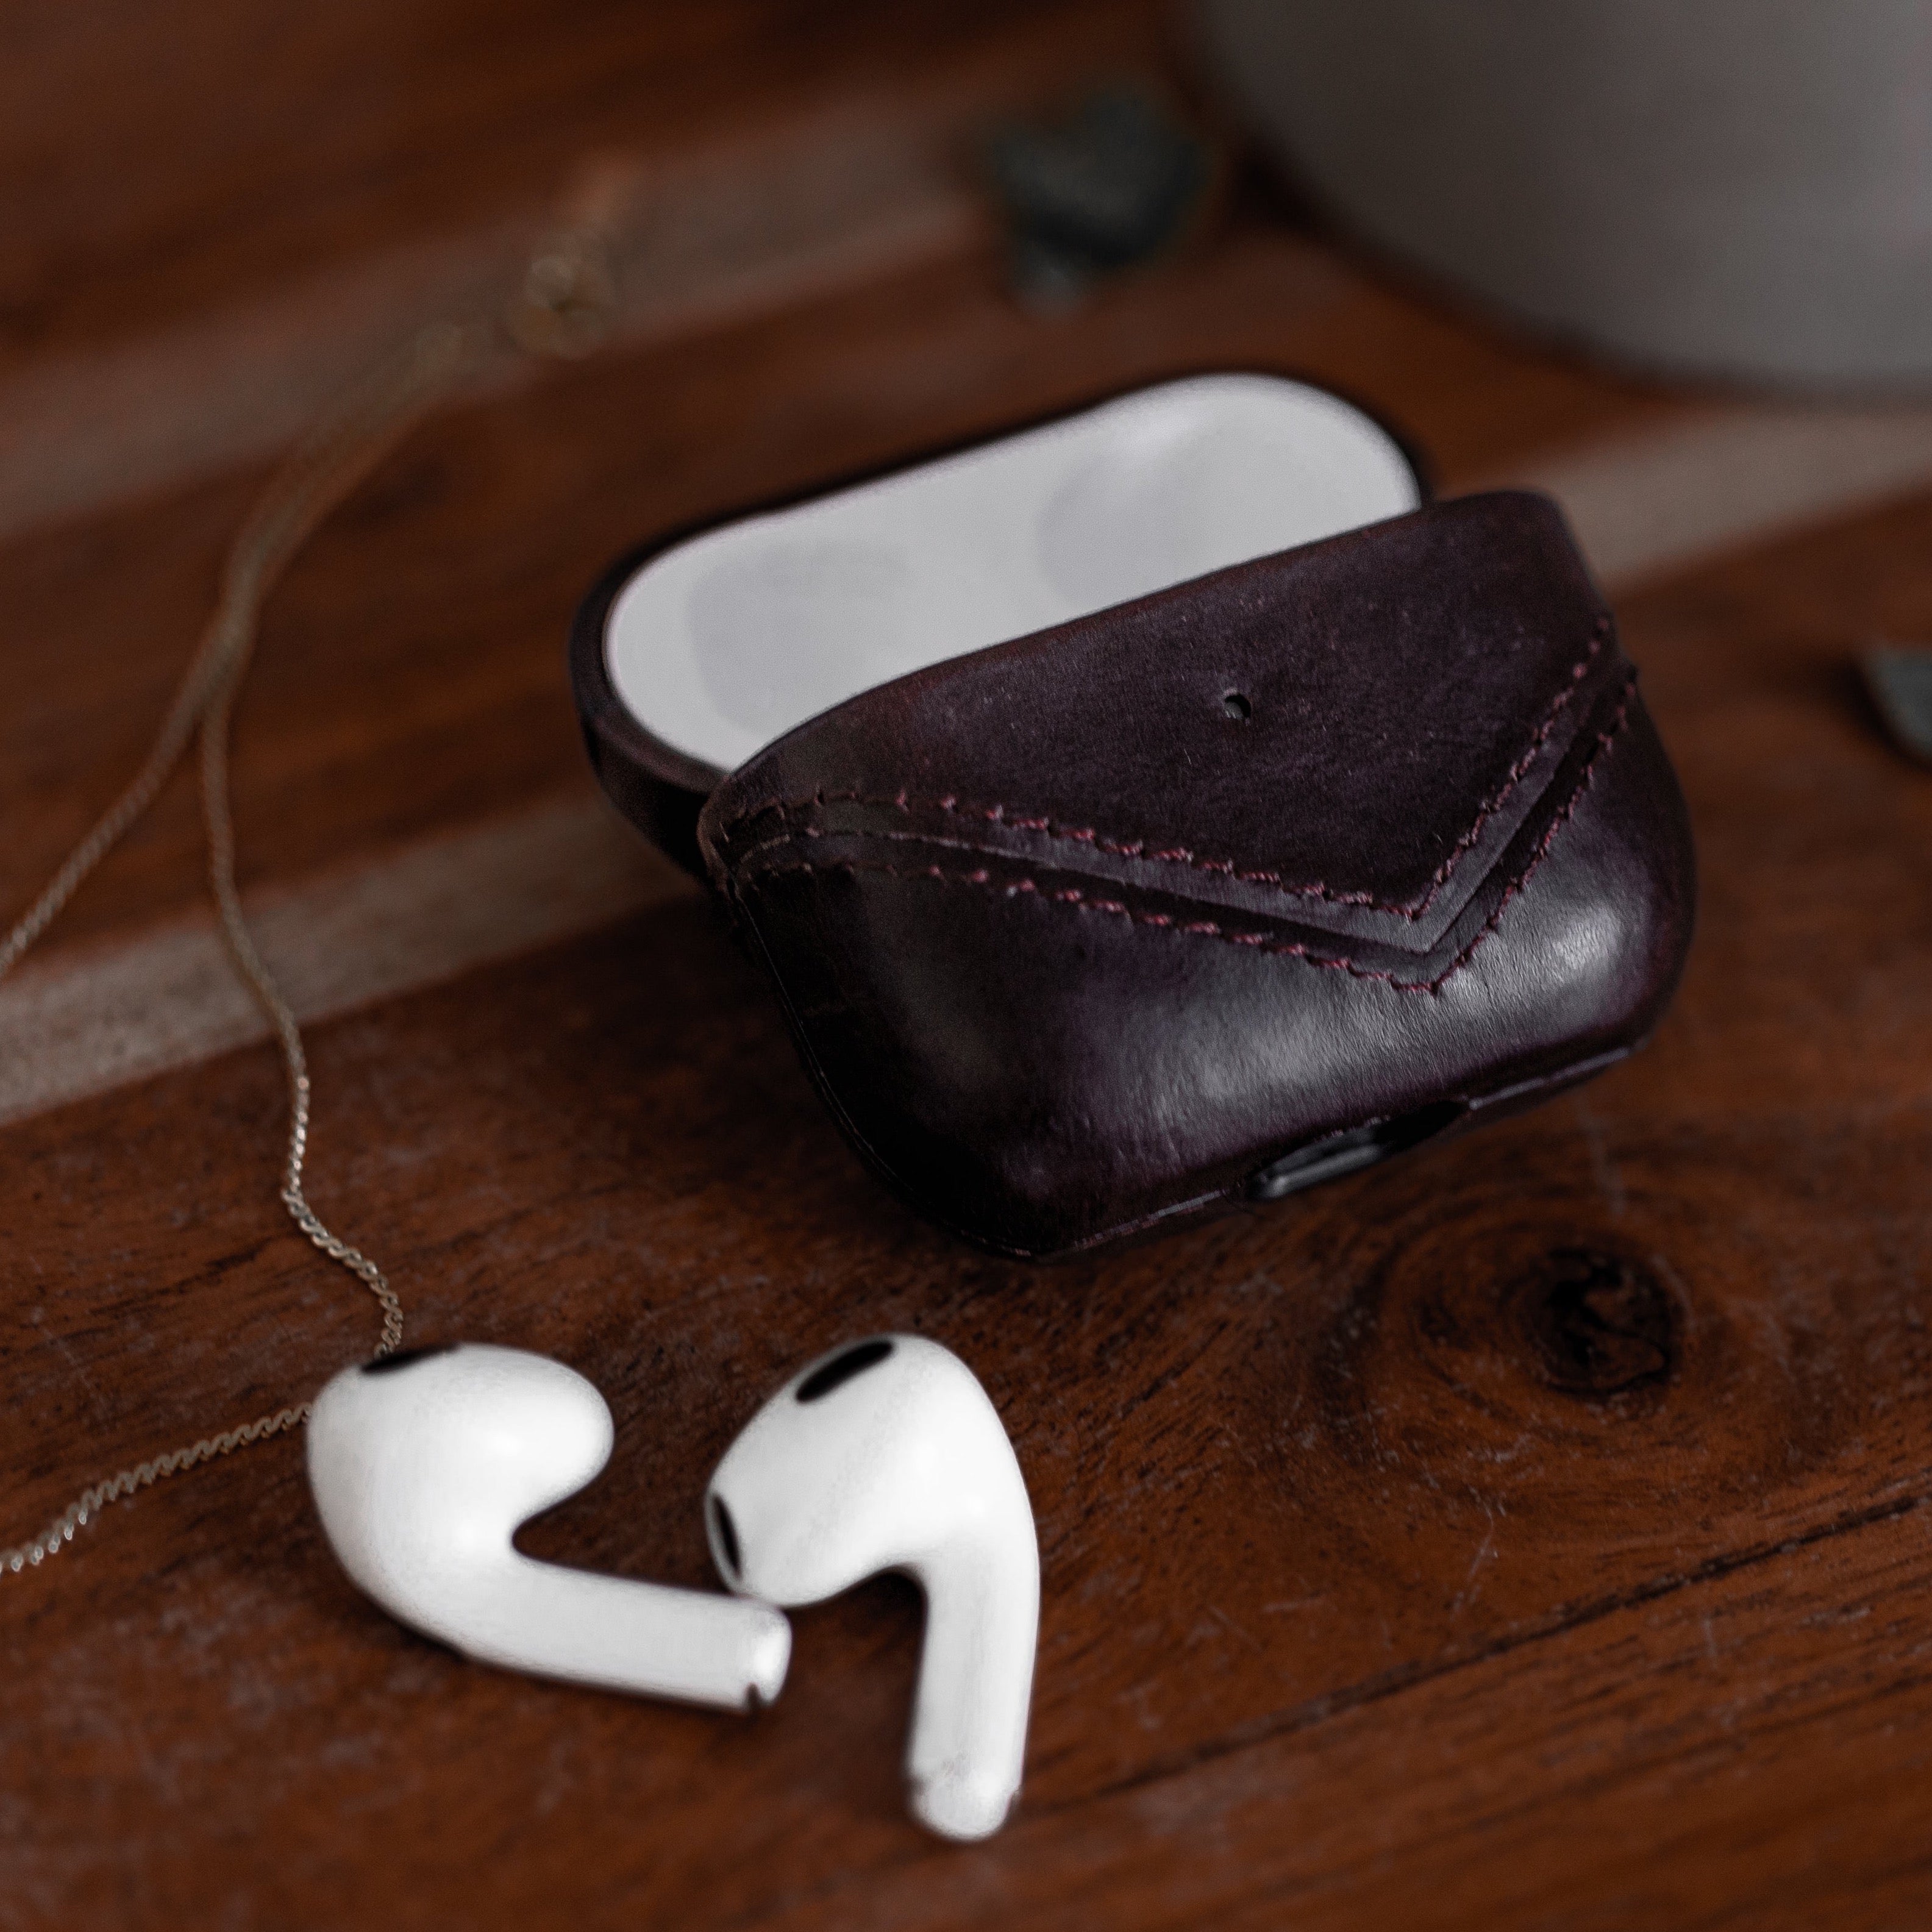 Leather AirPods Cases - BOURBON